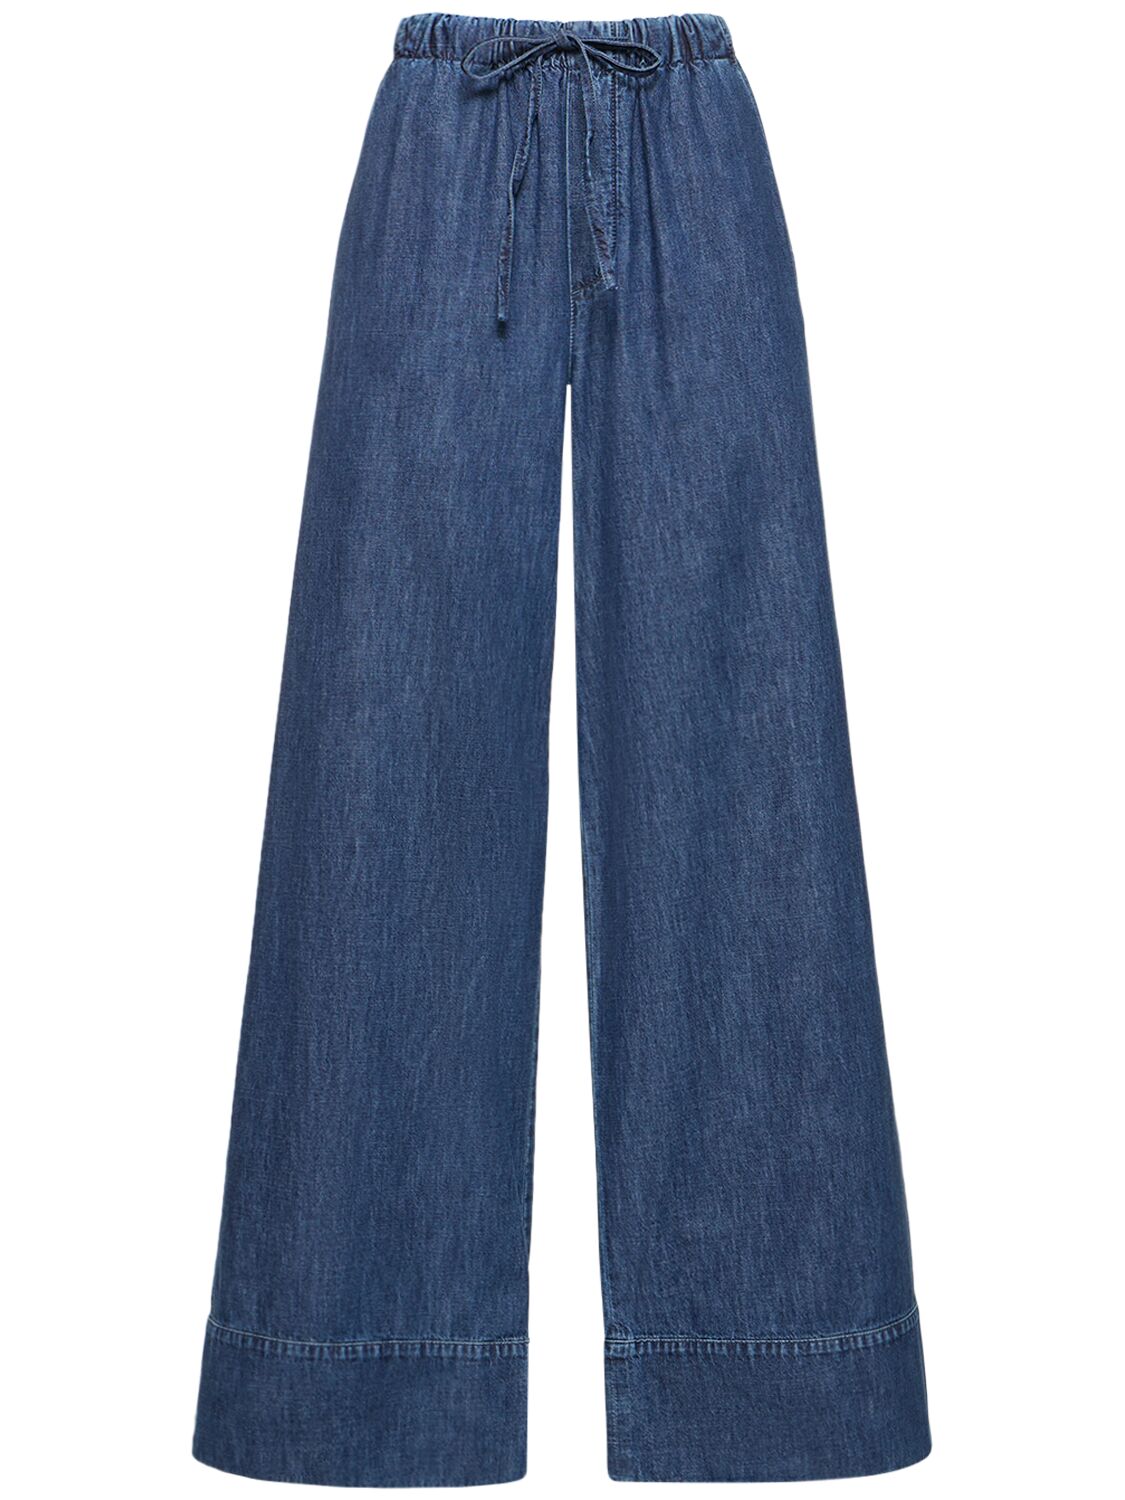 Image of Chambray Denim High Waist Wide Jeans